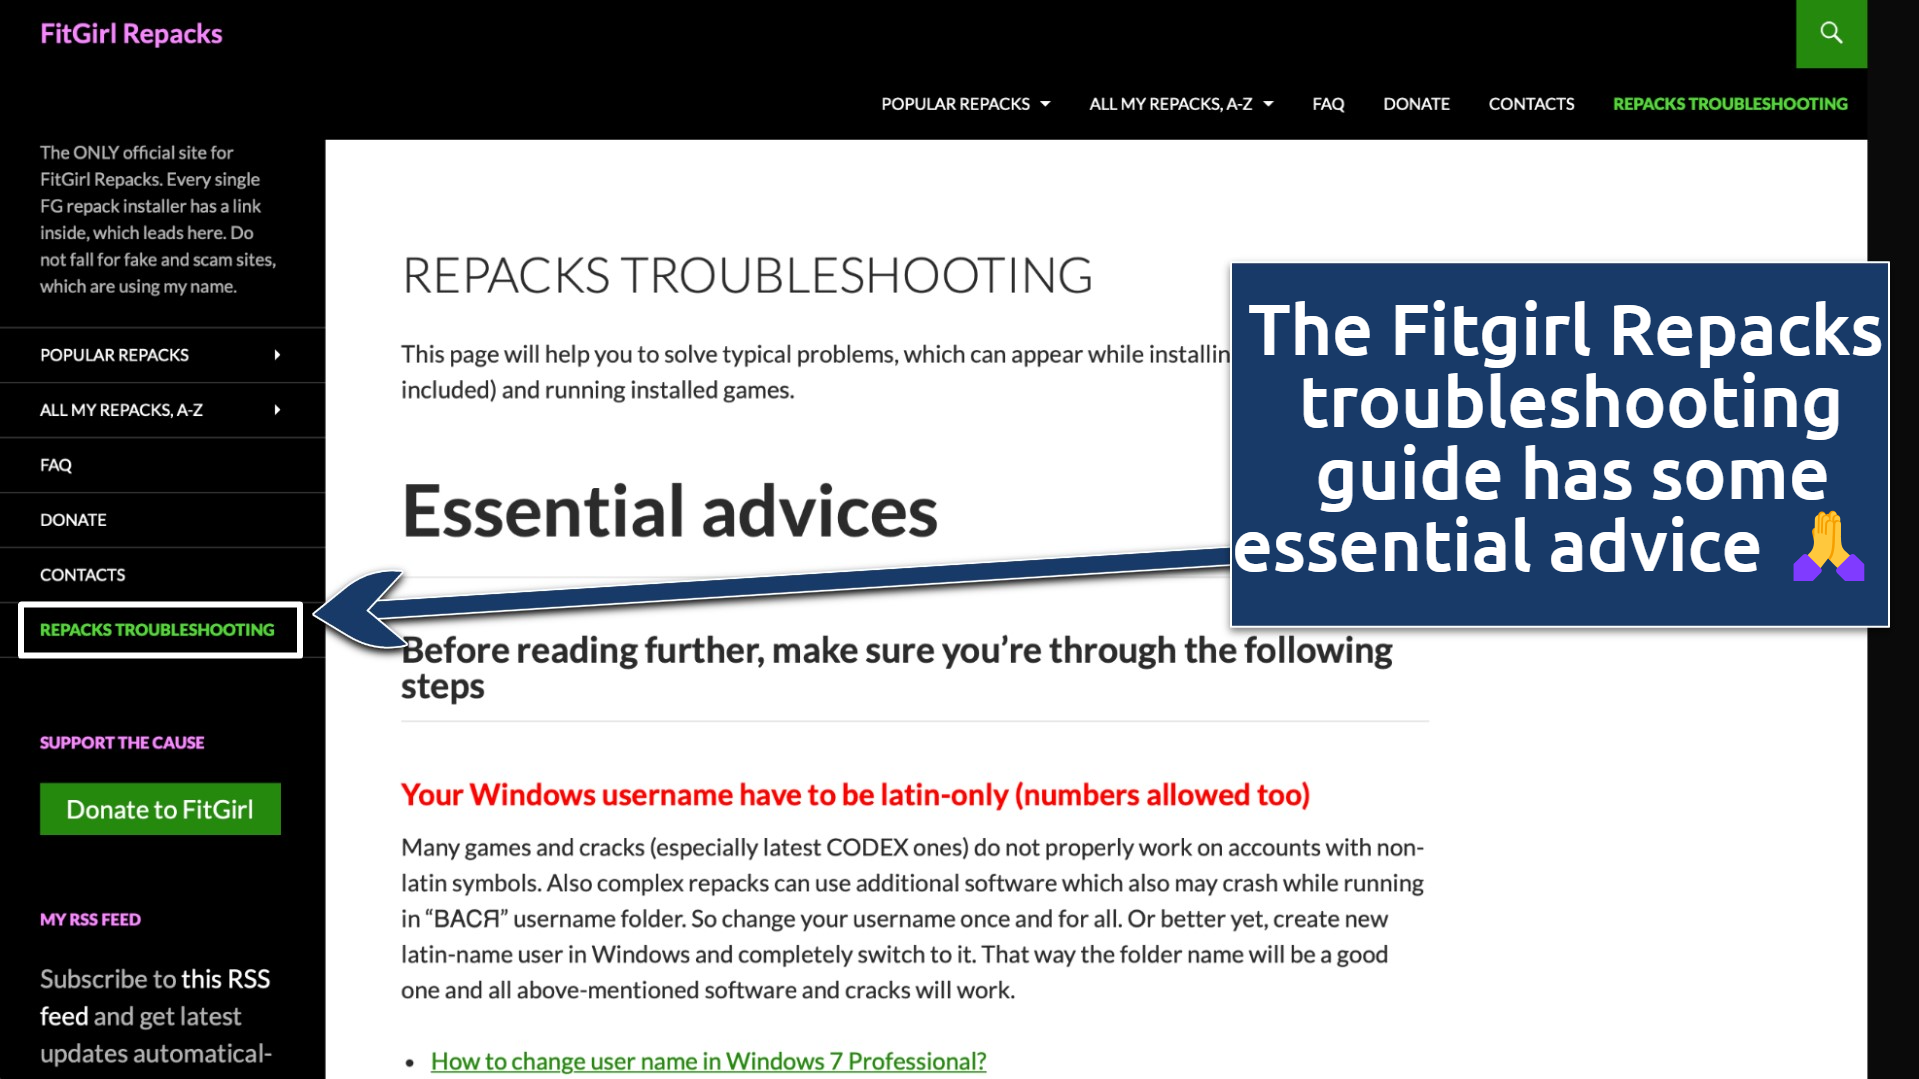 Screenshot of the Troubleshooting section on the Fitgirl Repacks website